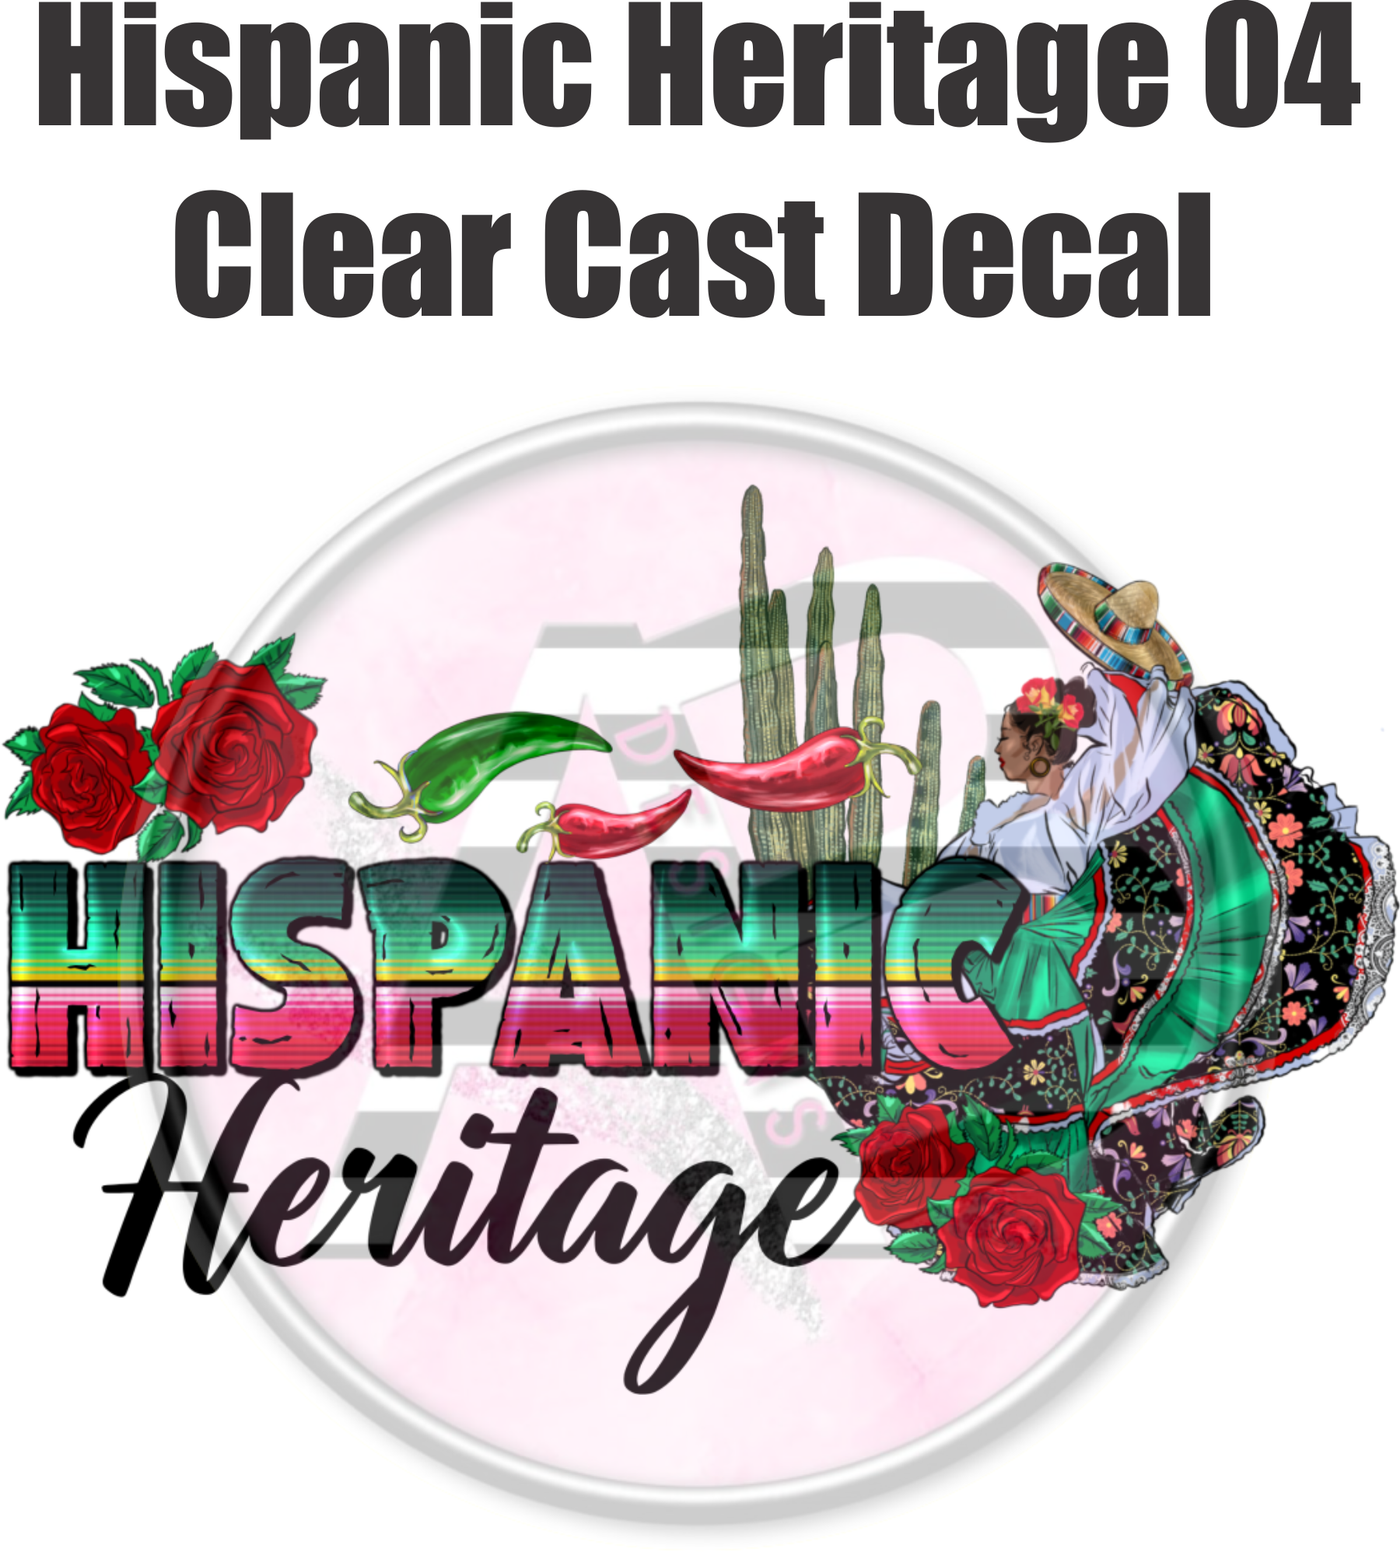 Hispanic Heritage 04 - Clear Cast Decal